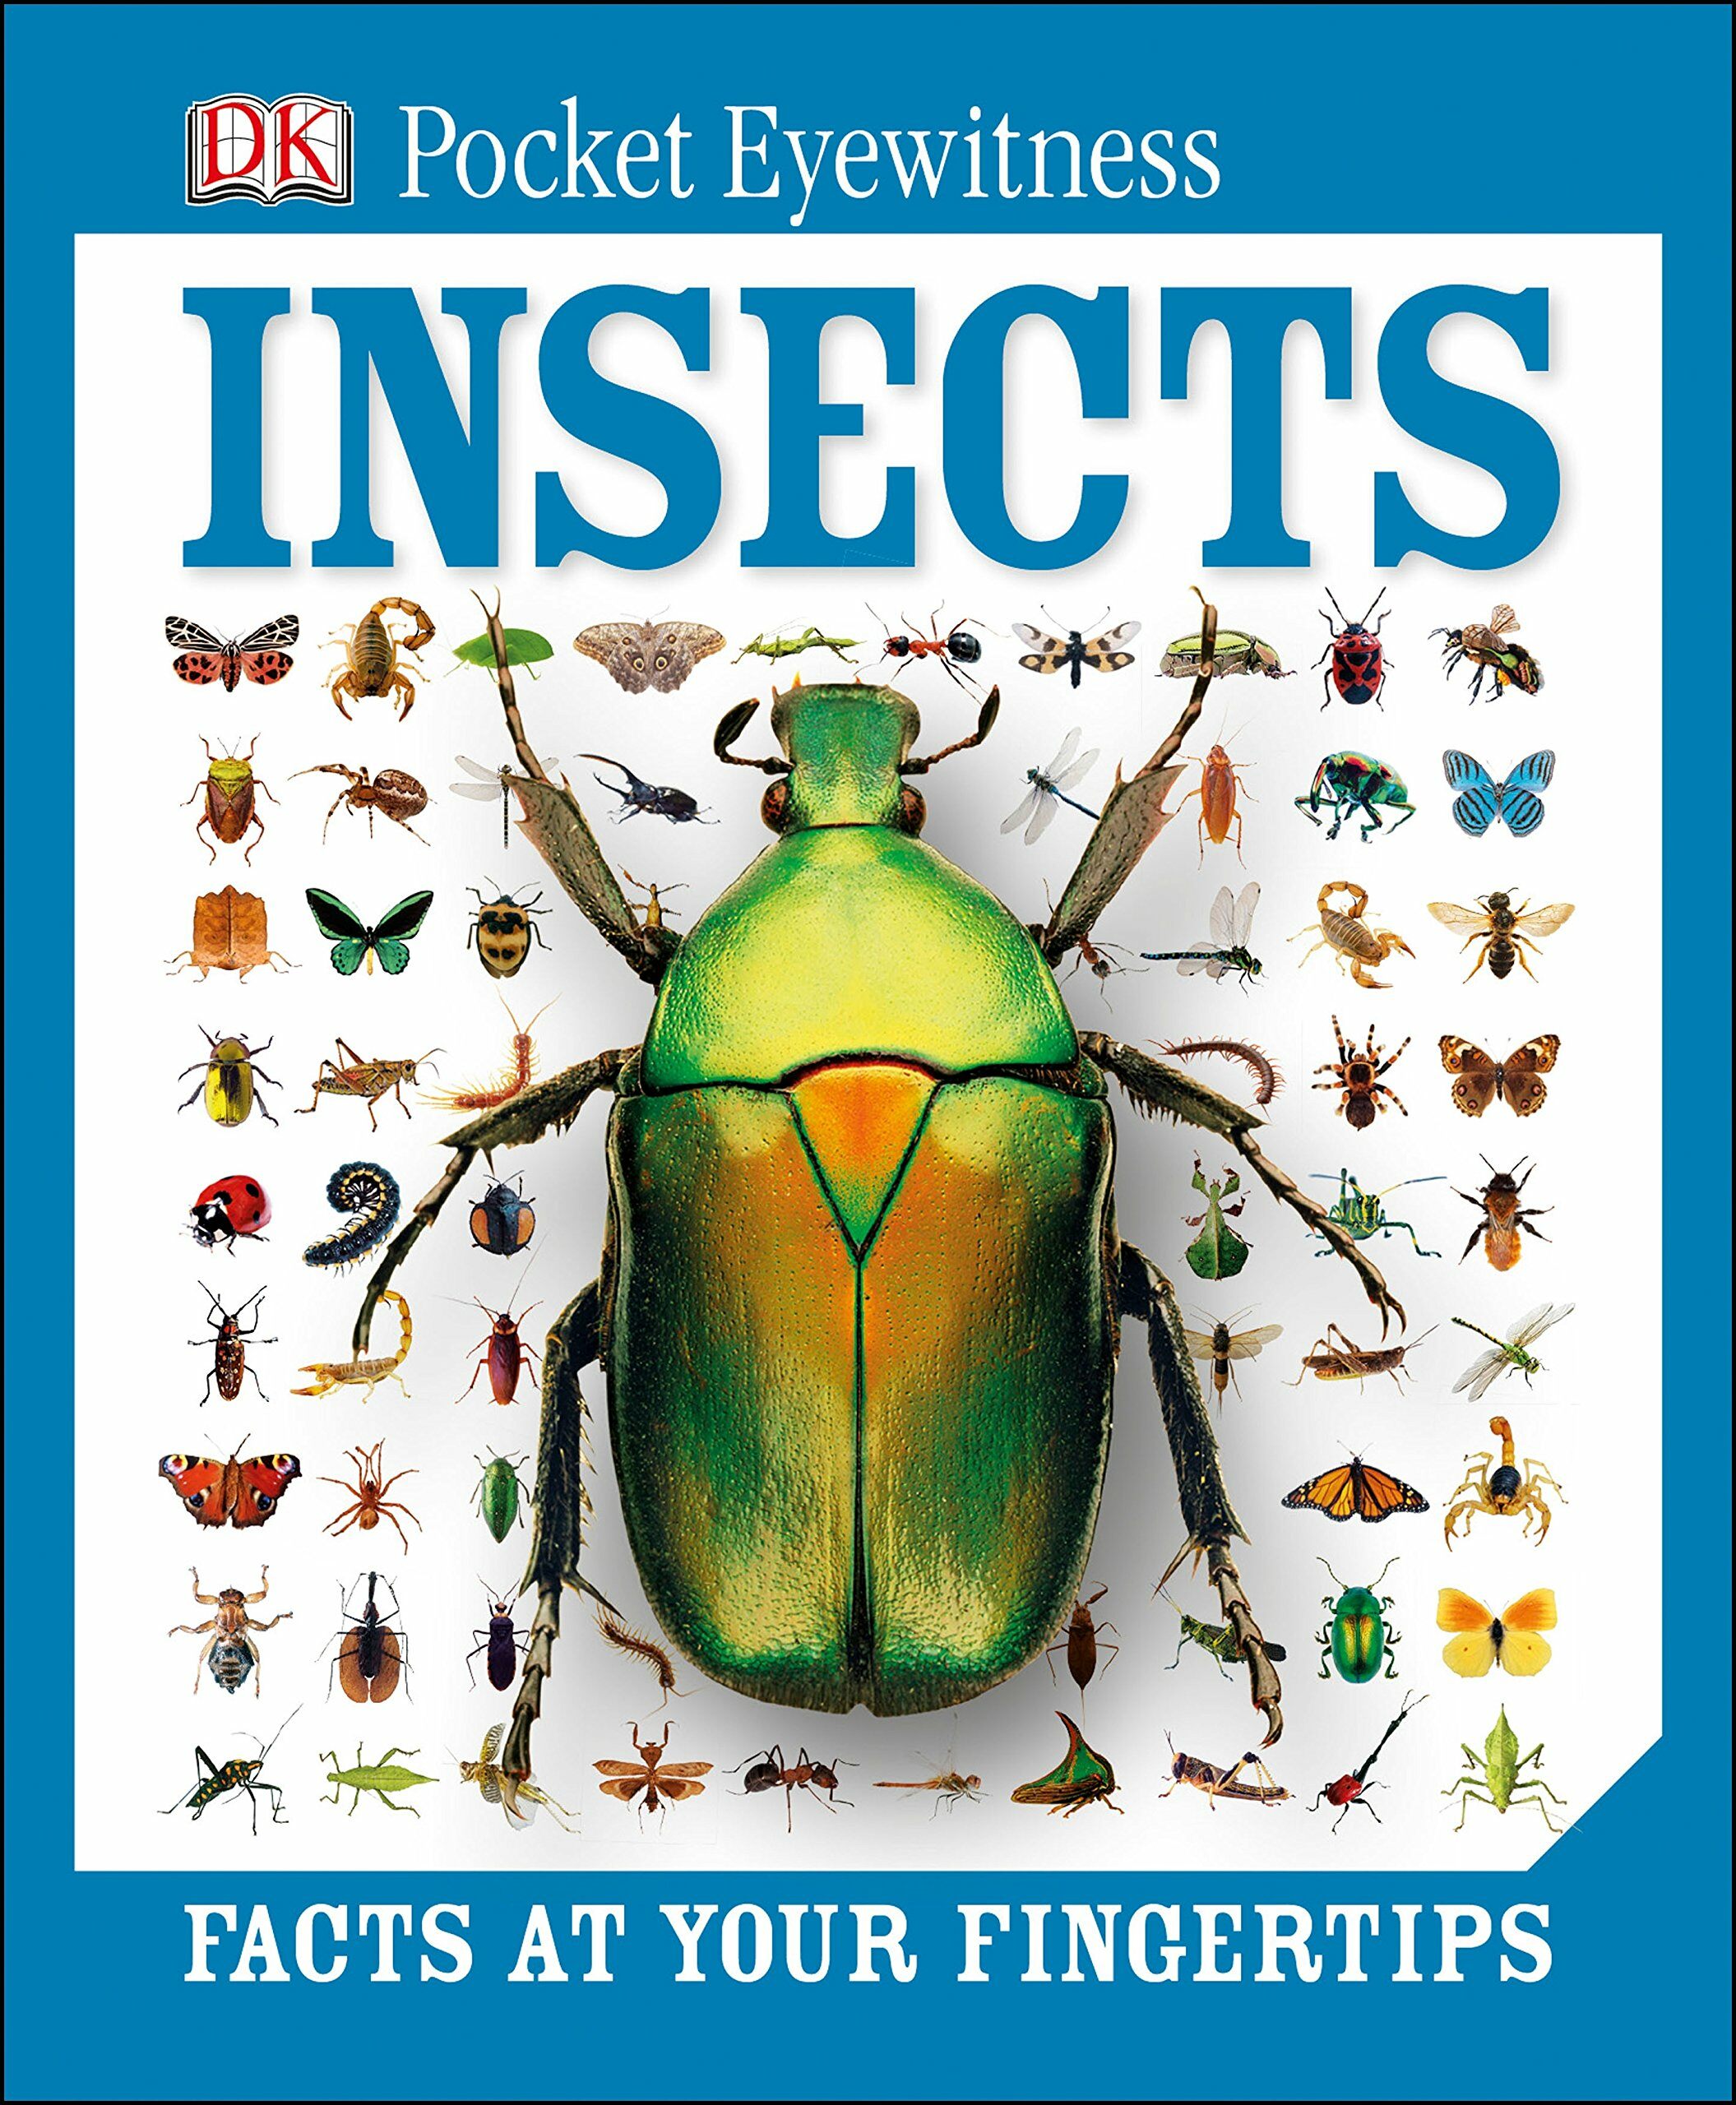 DK Pocket Eyewitness : Insects (Hardcover)